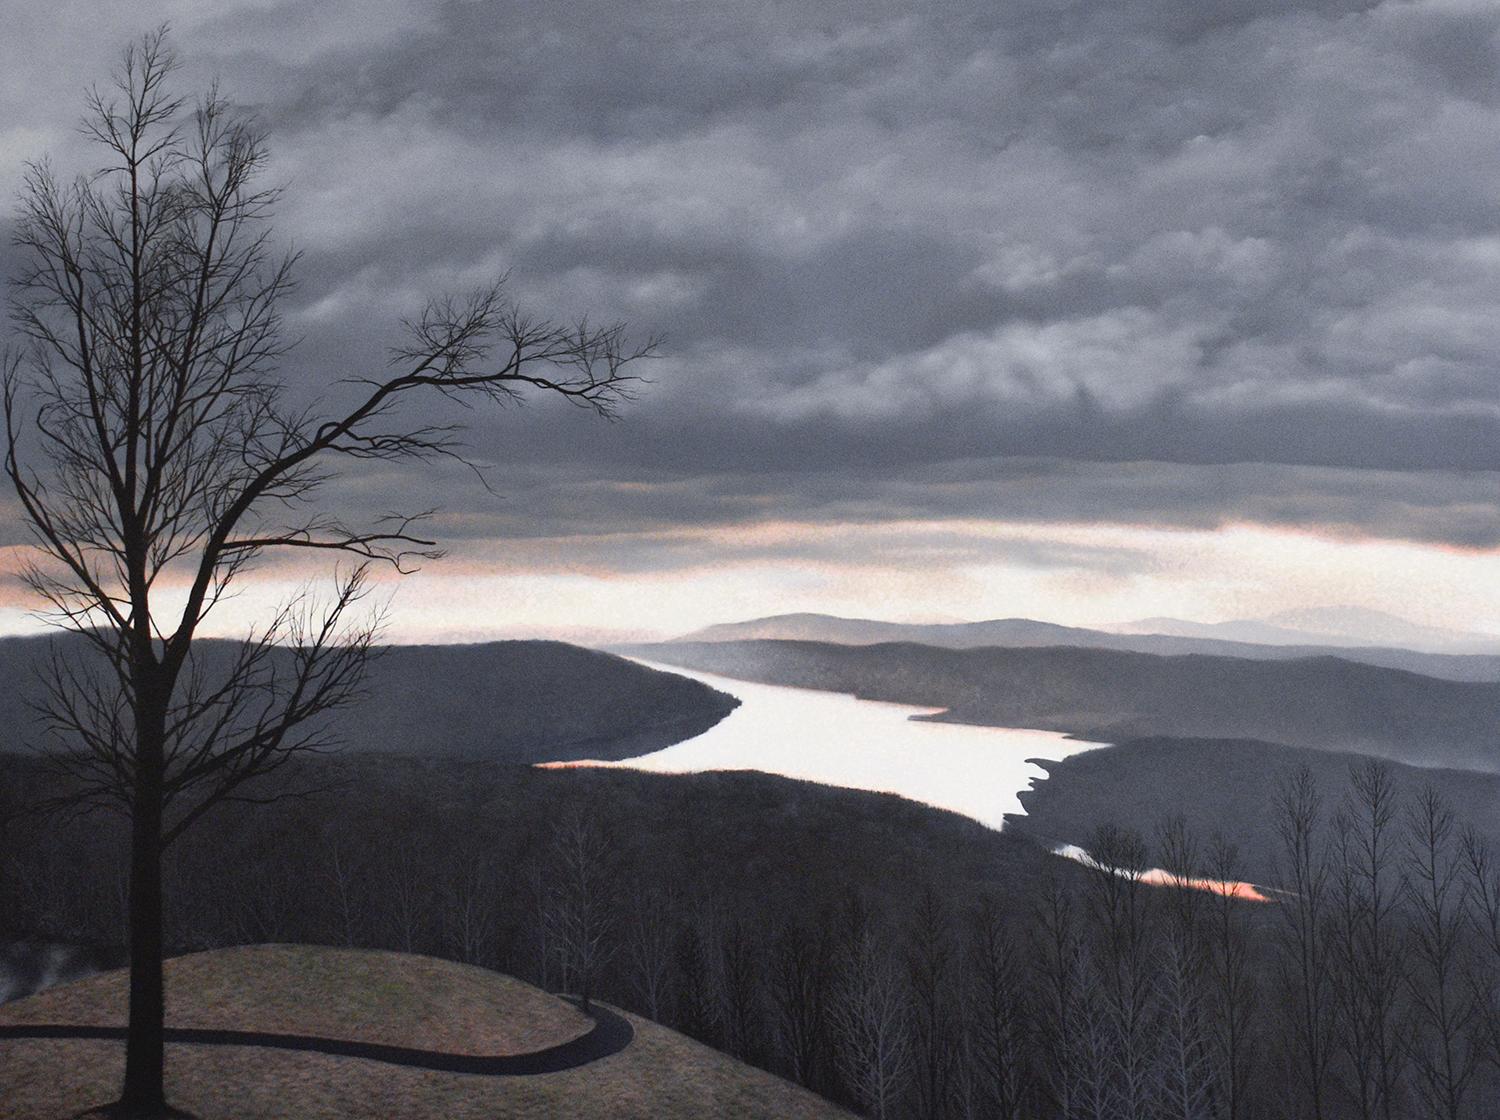 Photo-realist landscape painting of the Hudson River Valley from Olana, the historic home of Frederic Church
"Cusp", painted by Eileen Murphy in 2019
30 x 40 inches oil on panel, 31 x 41 inches in custom Larson Juhl dark wood frame
wire backing for